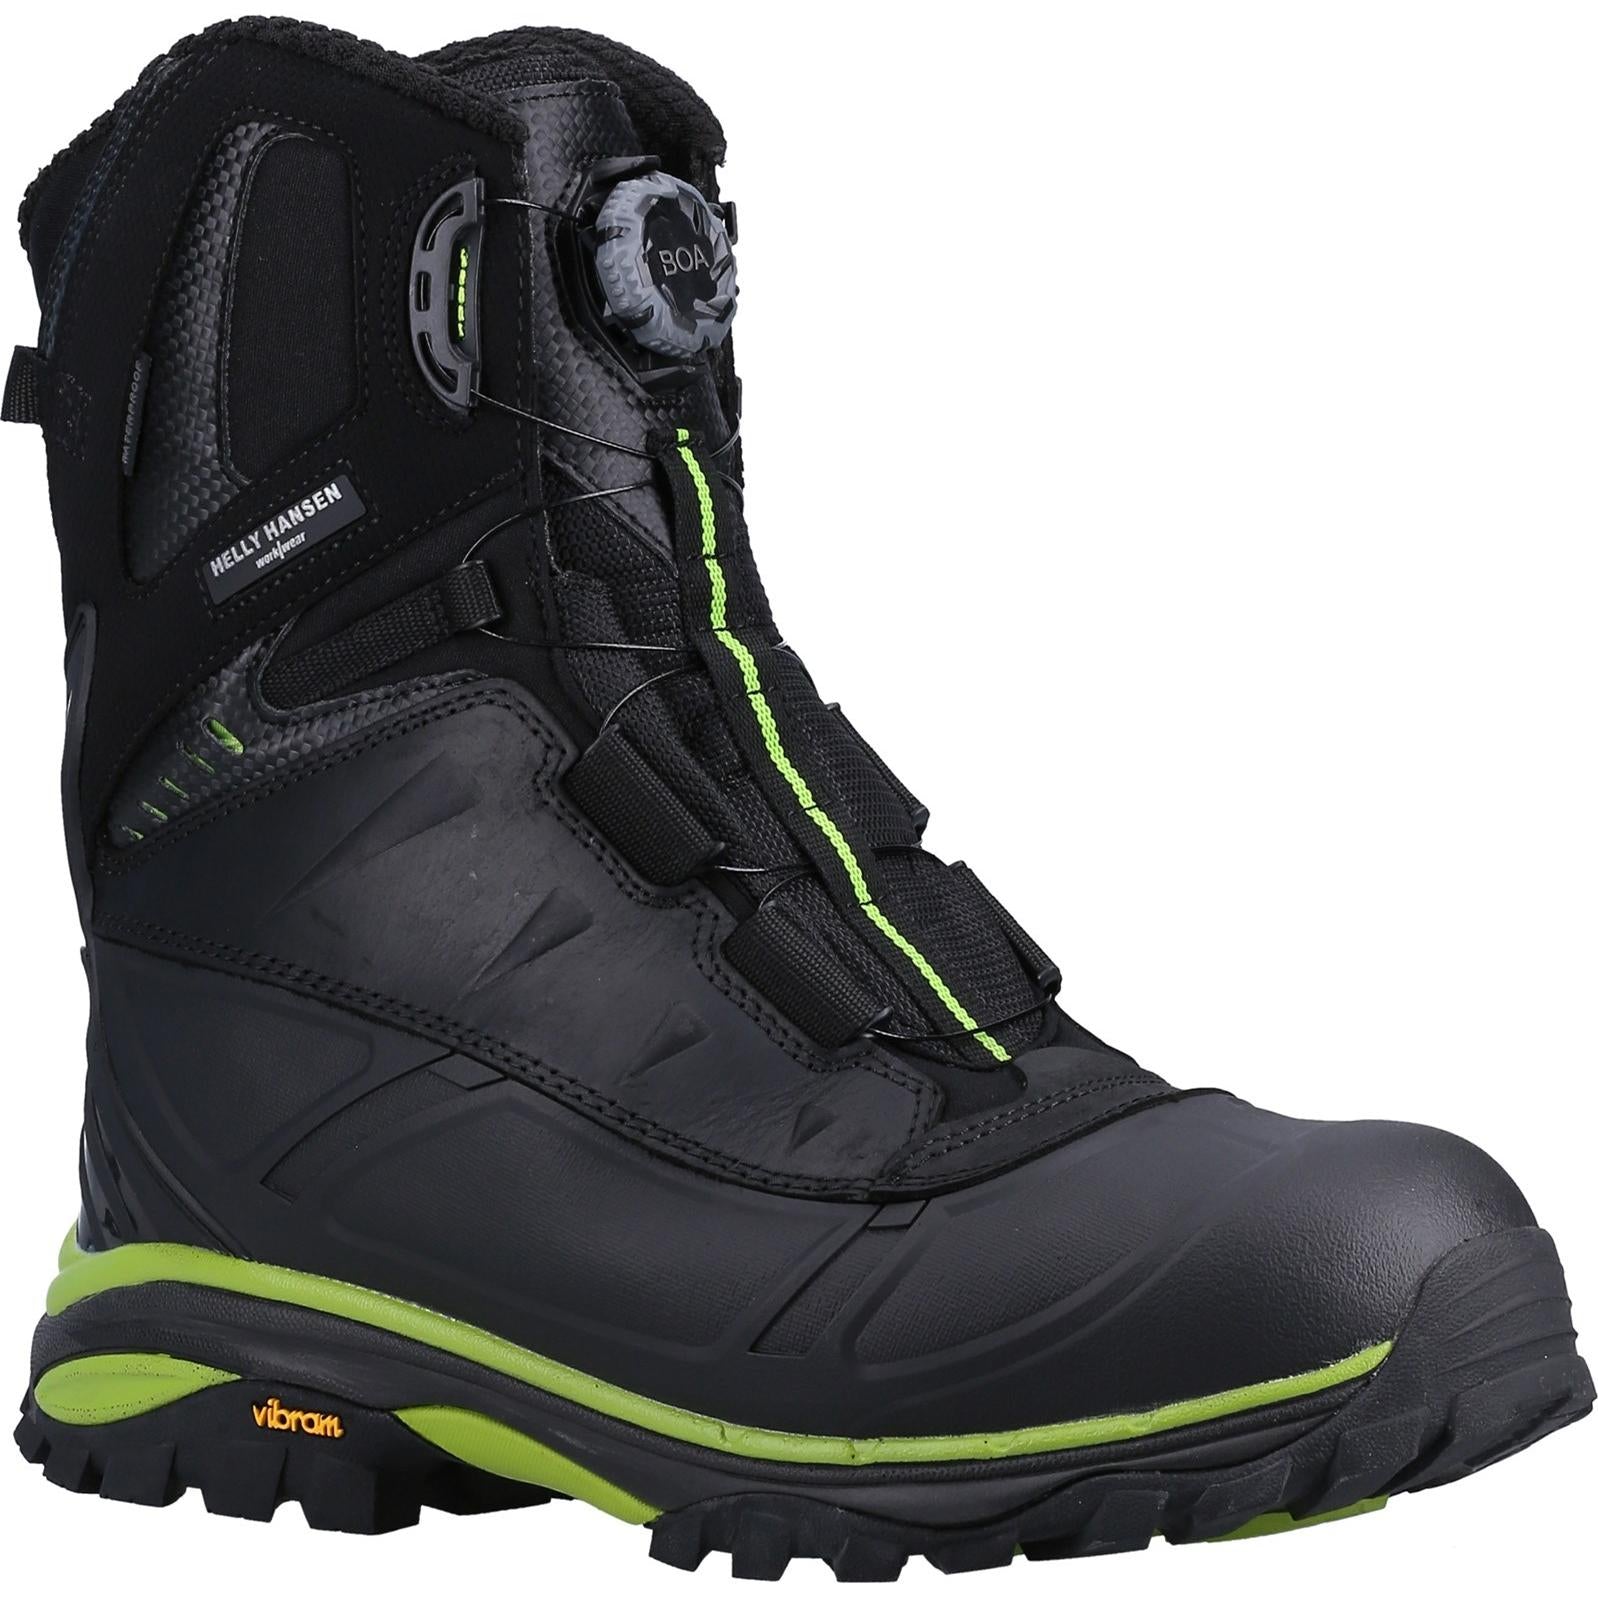 Helly Hansen Workwear Magni Boa Safety Winterboot Boots